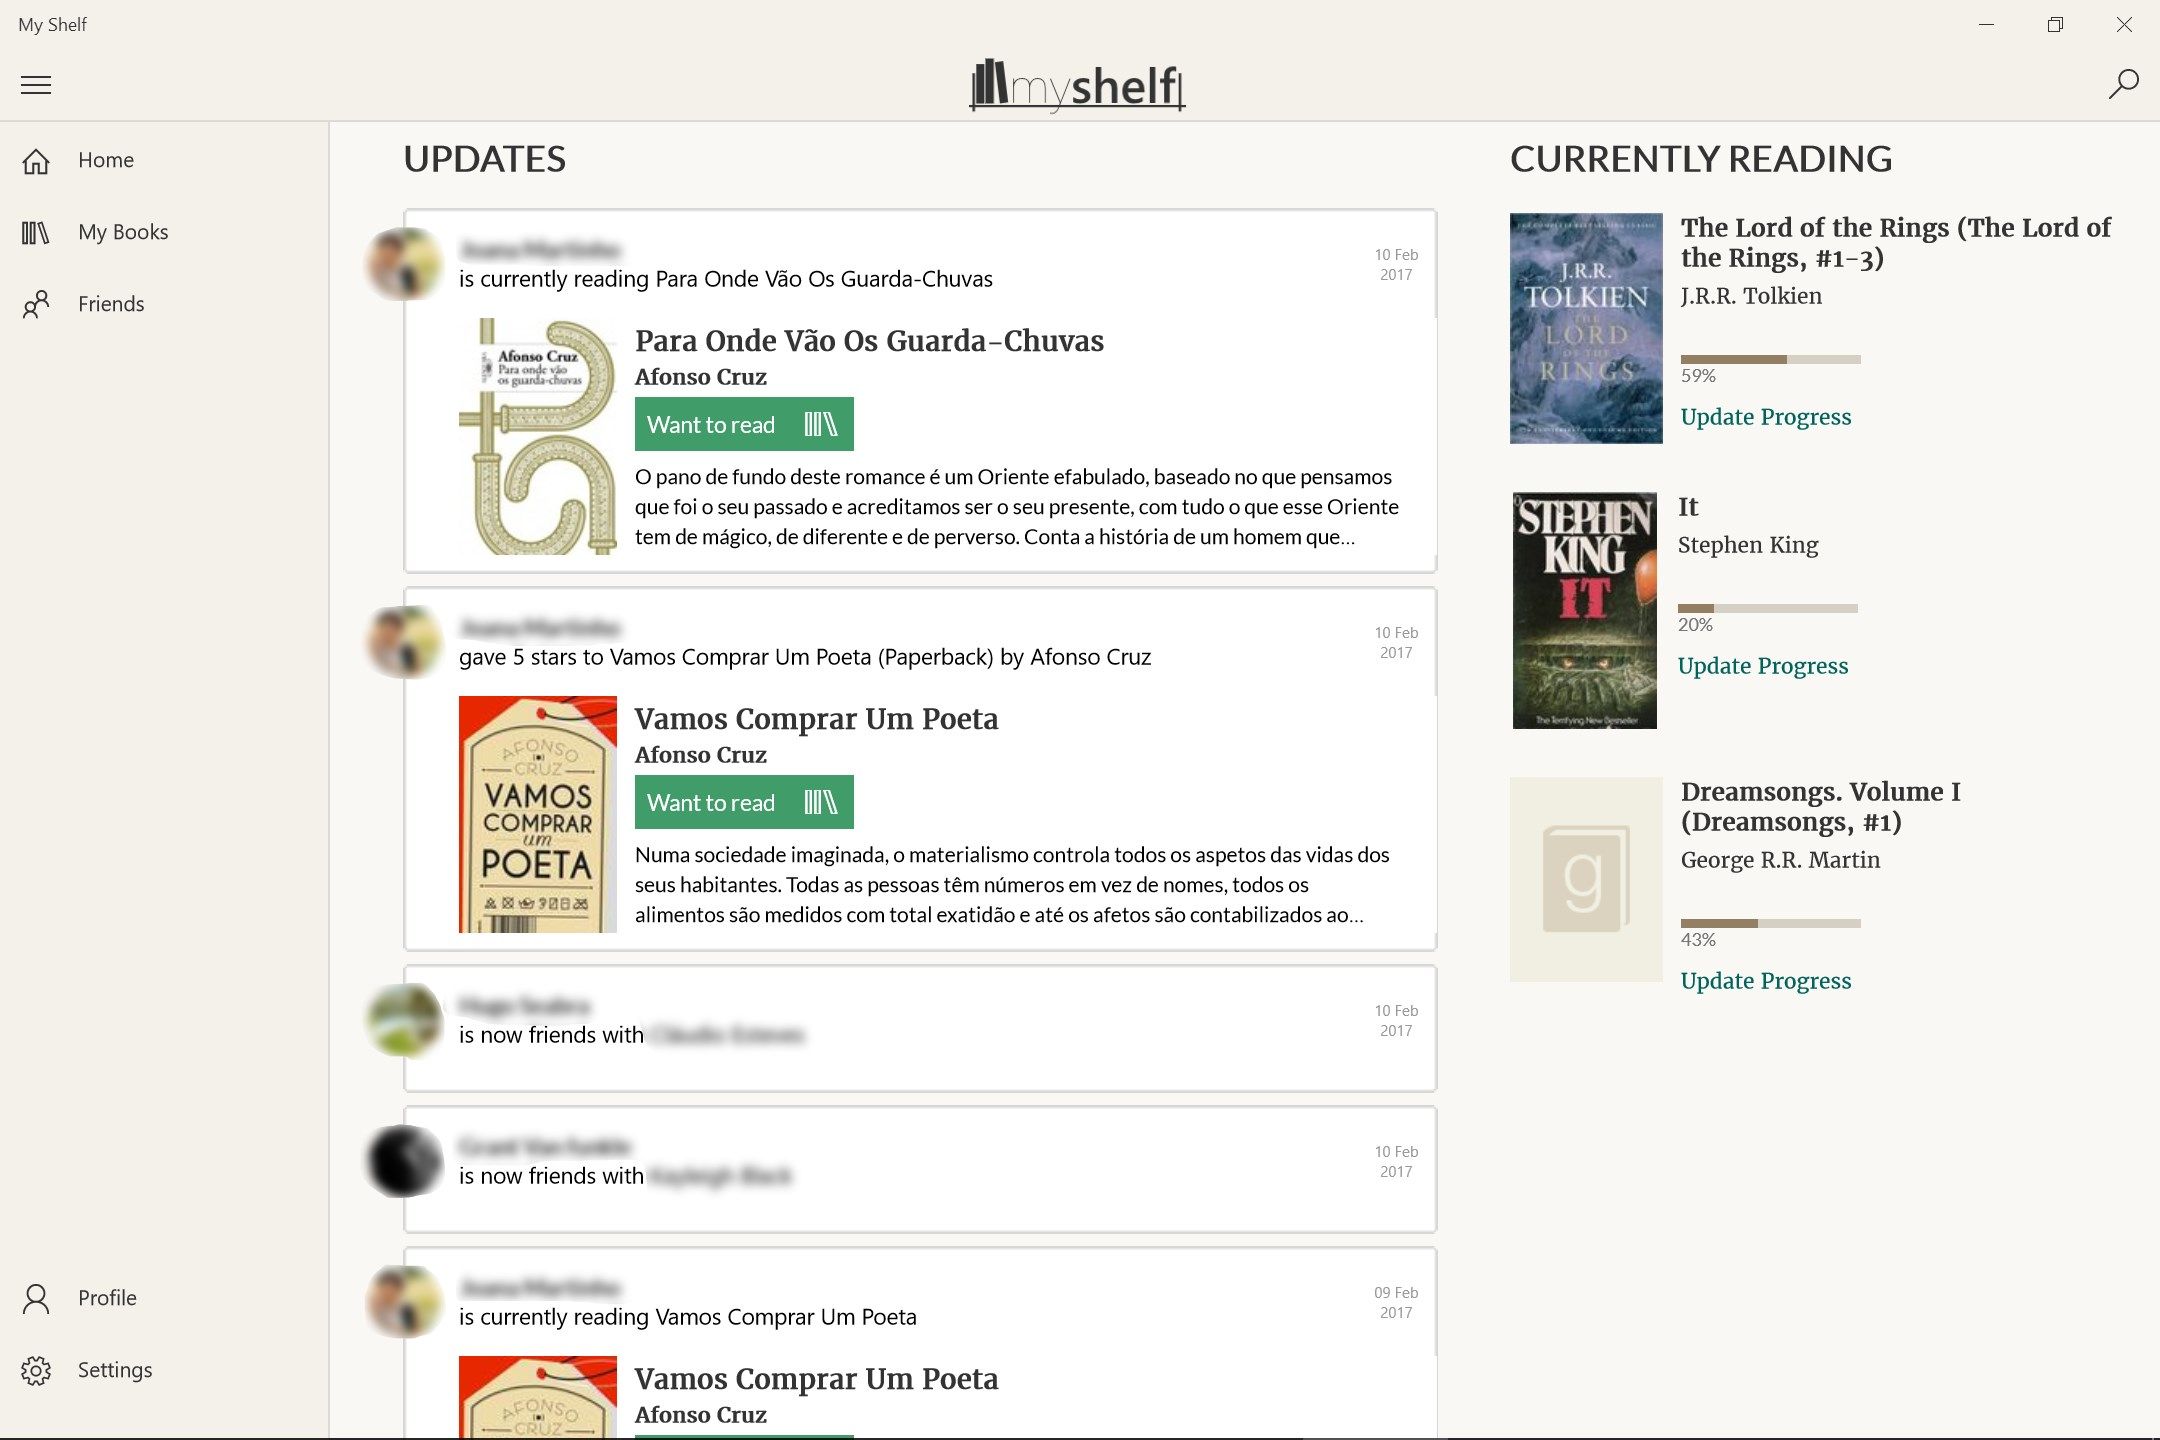 Check your goodreads feed and update your currently reading list